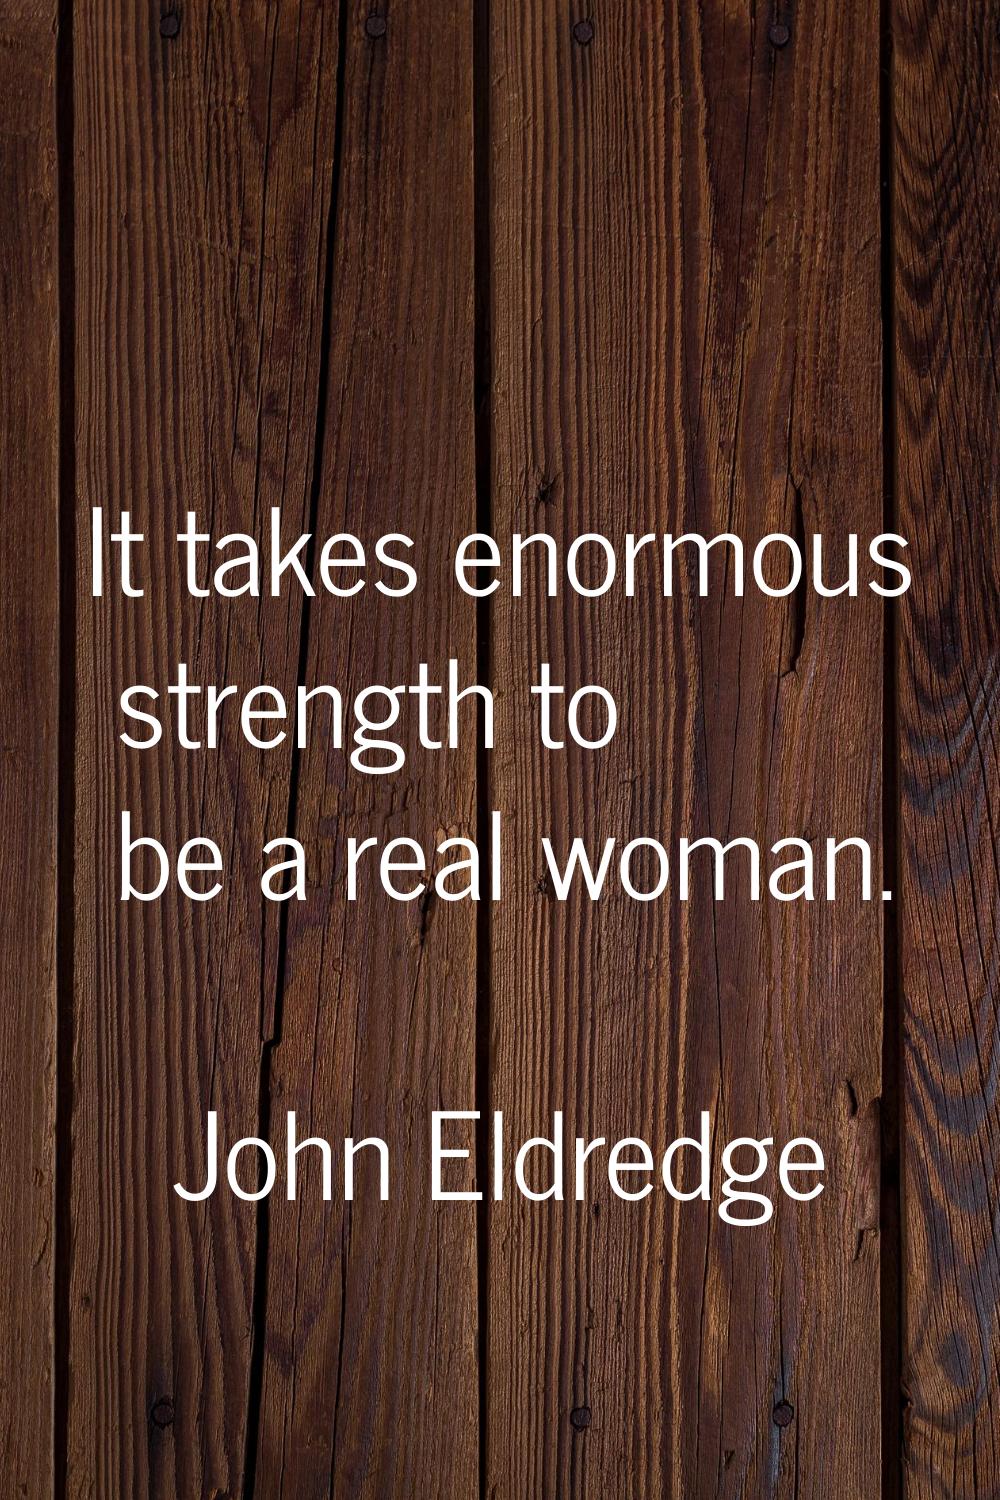 It takes enormous strength to be a real woman.